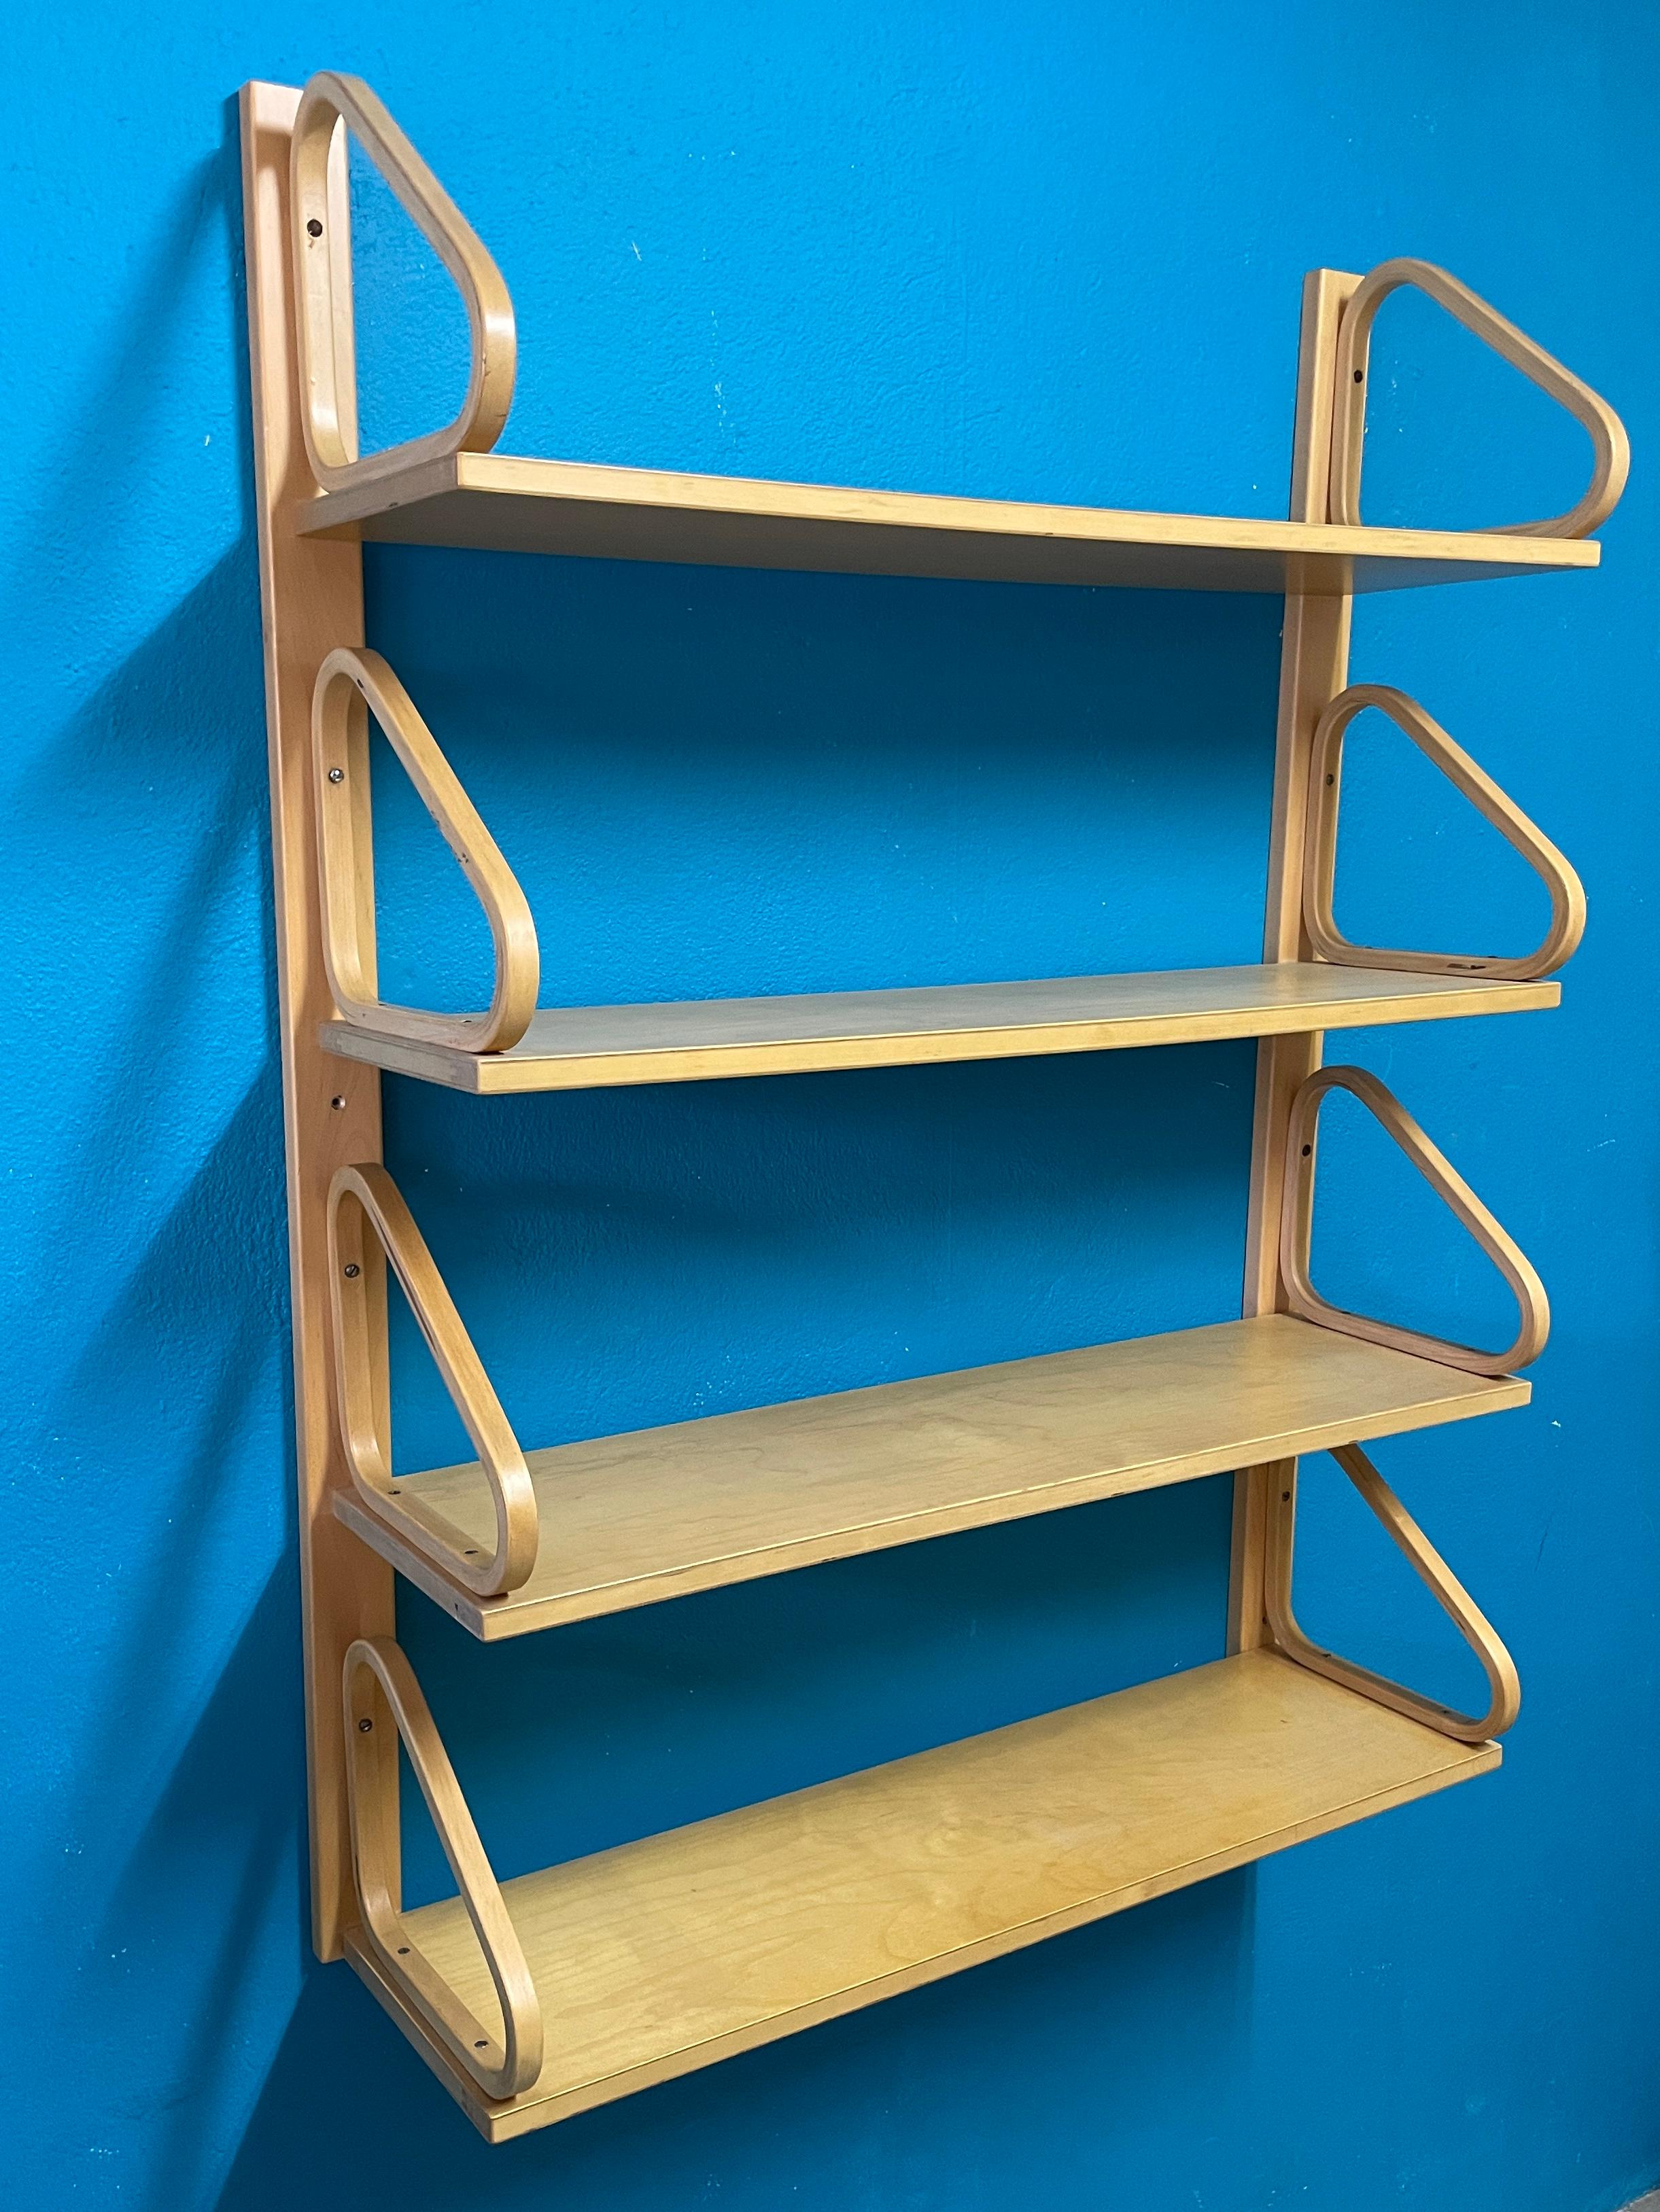 Nice bookshelf by Alvar Aalto. Includes 4 112b shelfs and original wall mounts. Bookshelf are made from bent birch, solid birch and plywood birch. Fingerjoint construction. Minus-head screws.

Sold as one set.